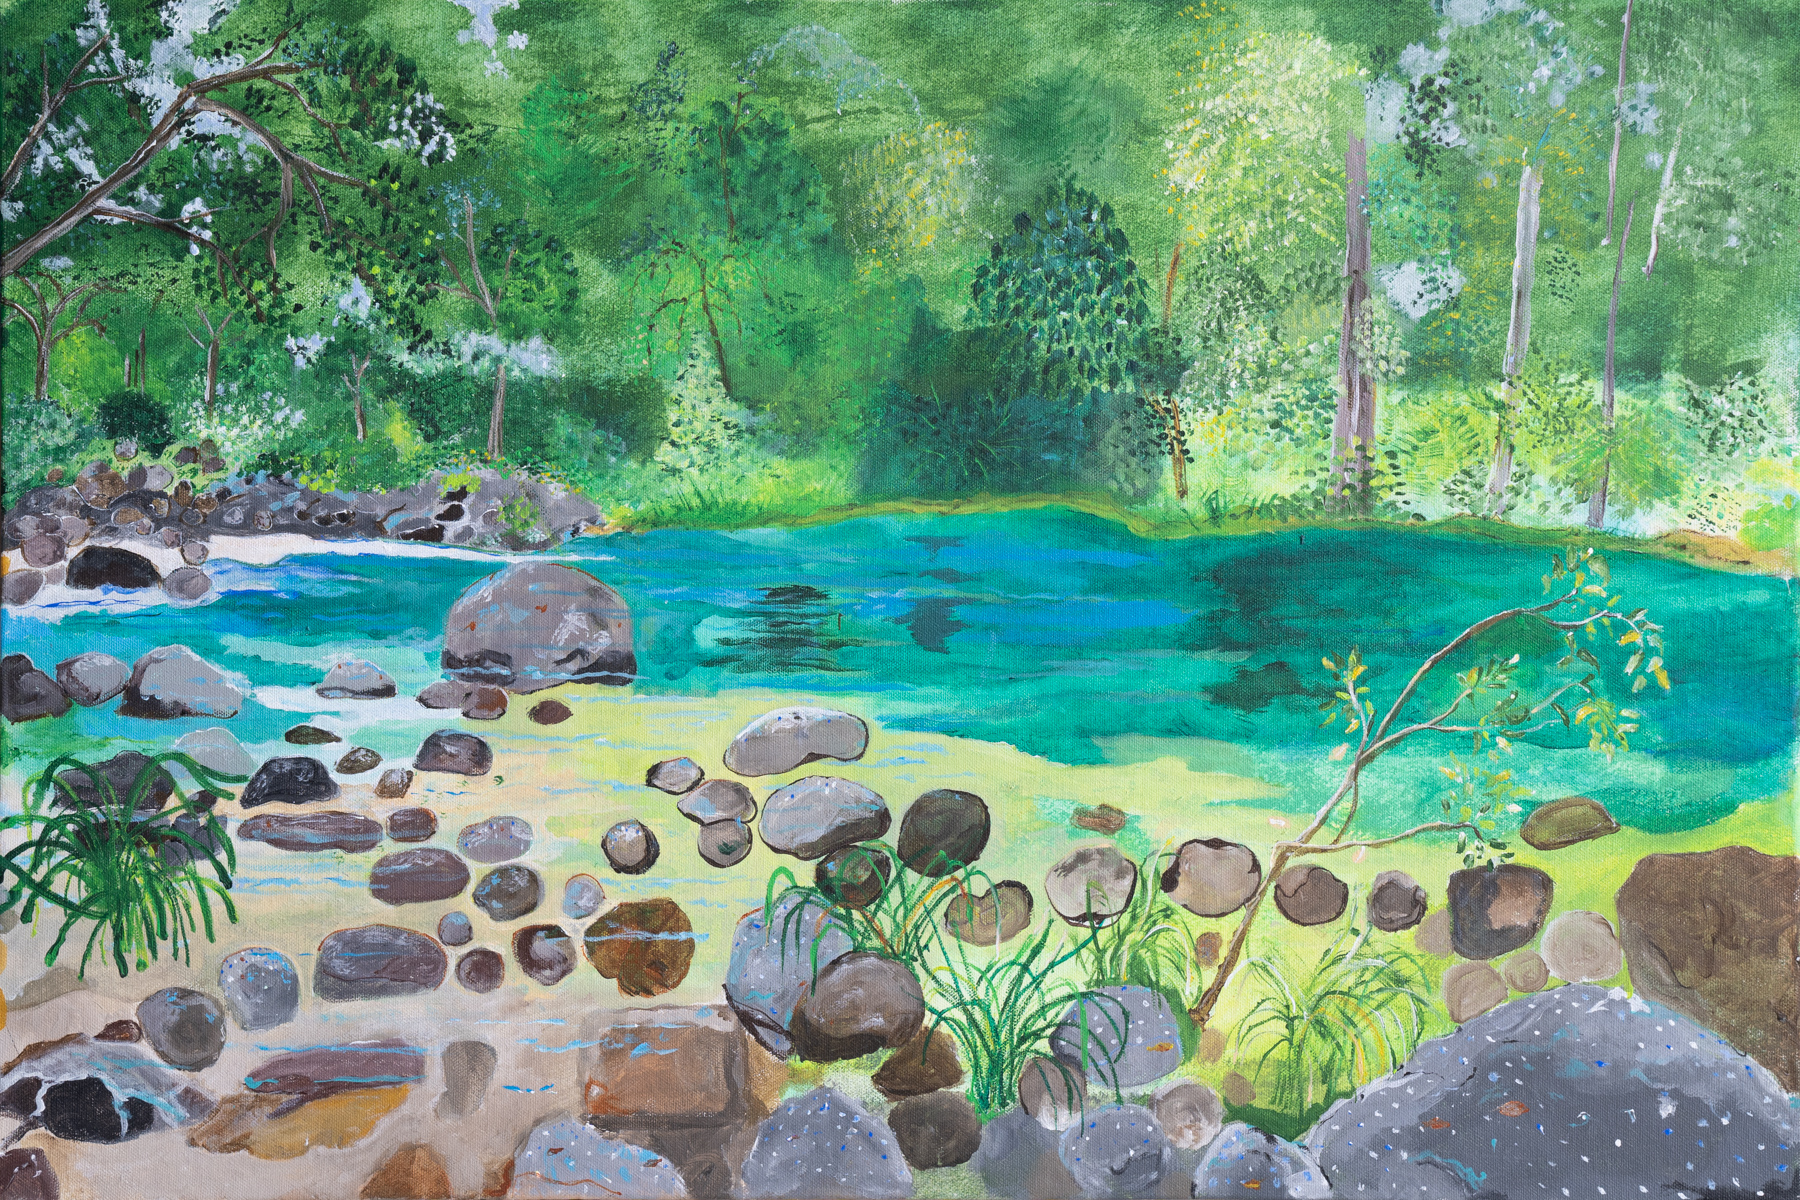 Nature painting, showing a pond, stones and trees